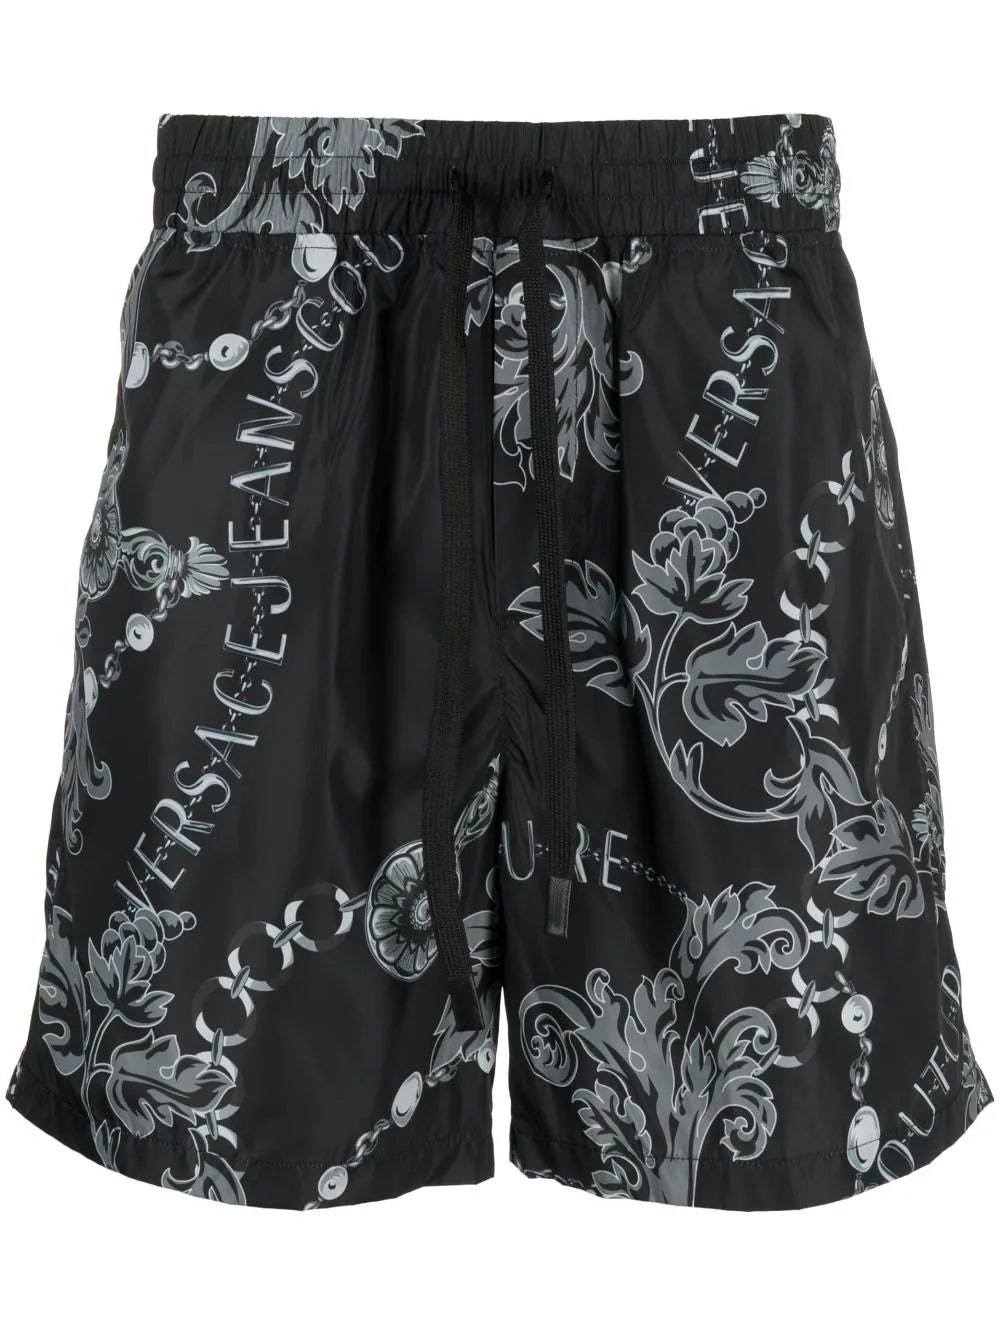 Chain Couture drawstring shorts